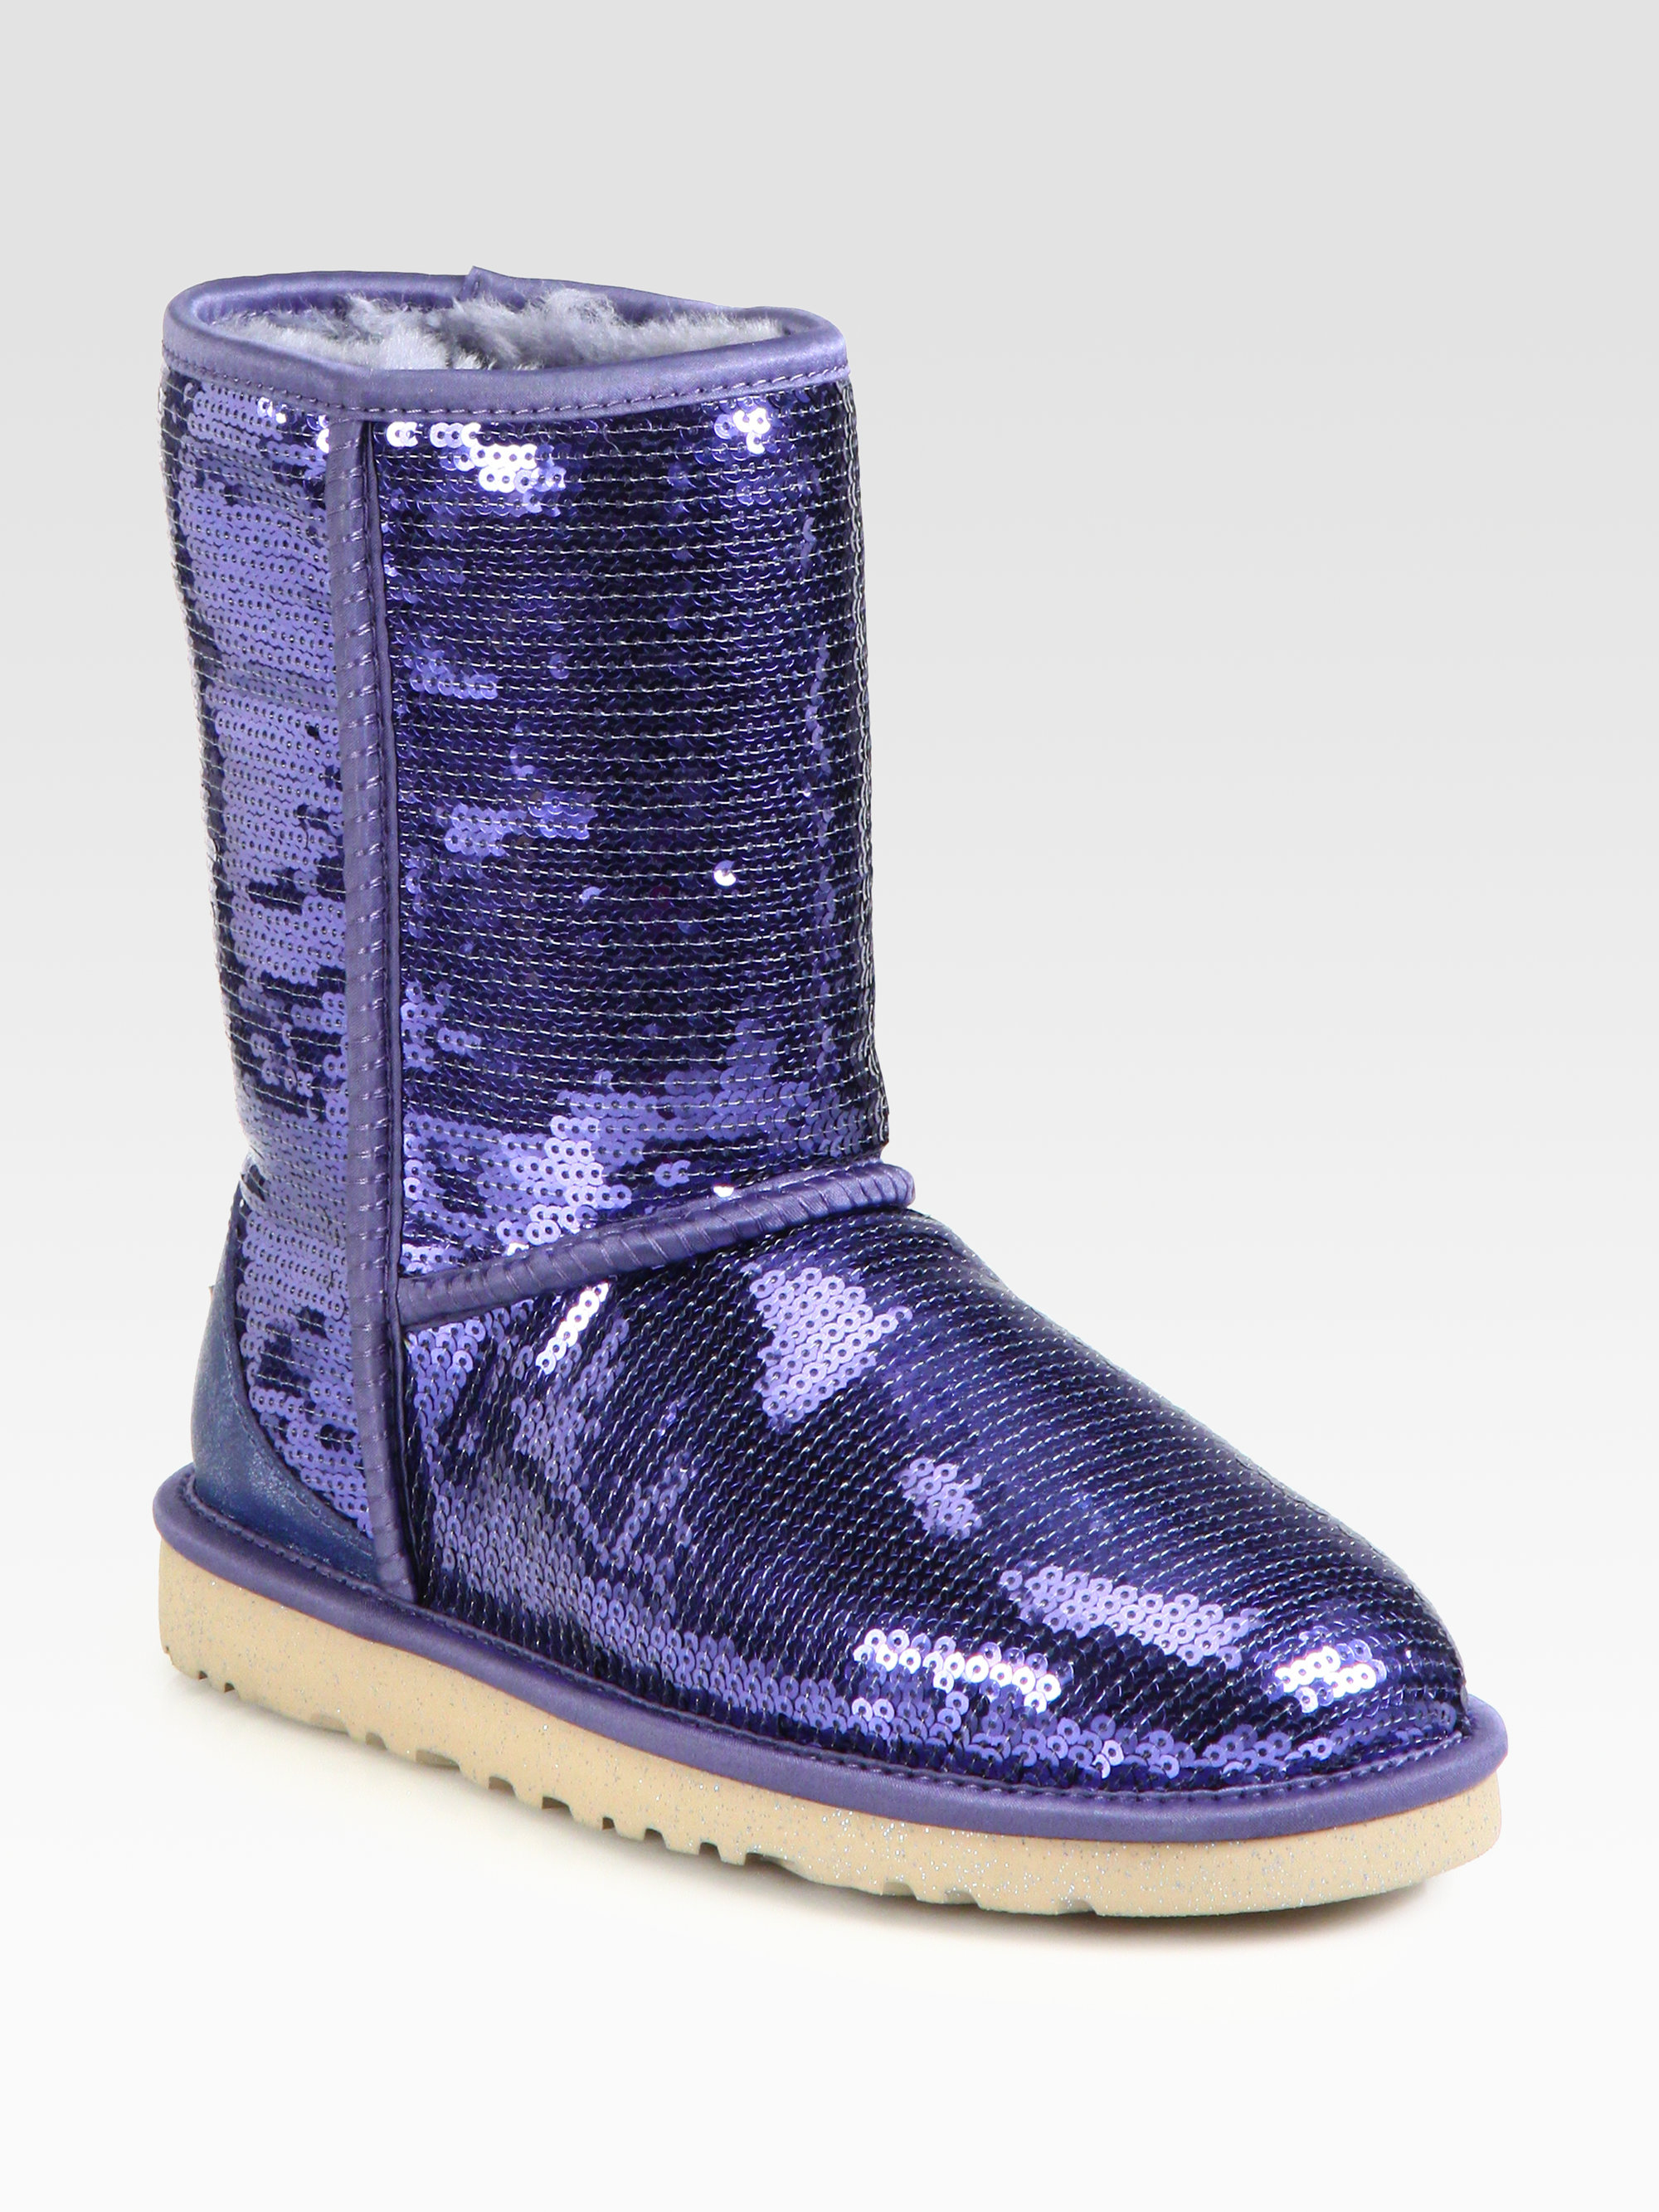 UGG Classic Short Sequin Boots in Navy (Purple) - Lyst